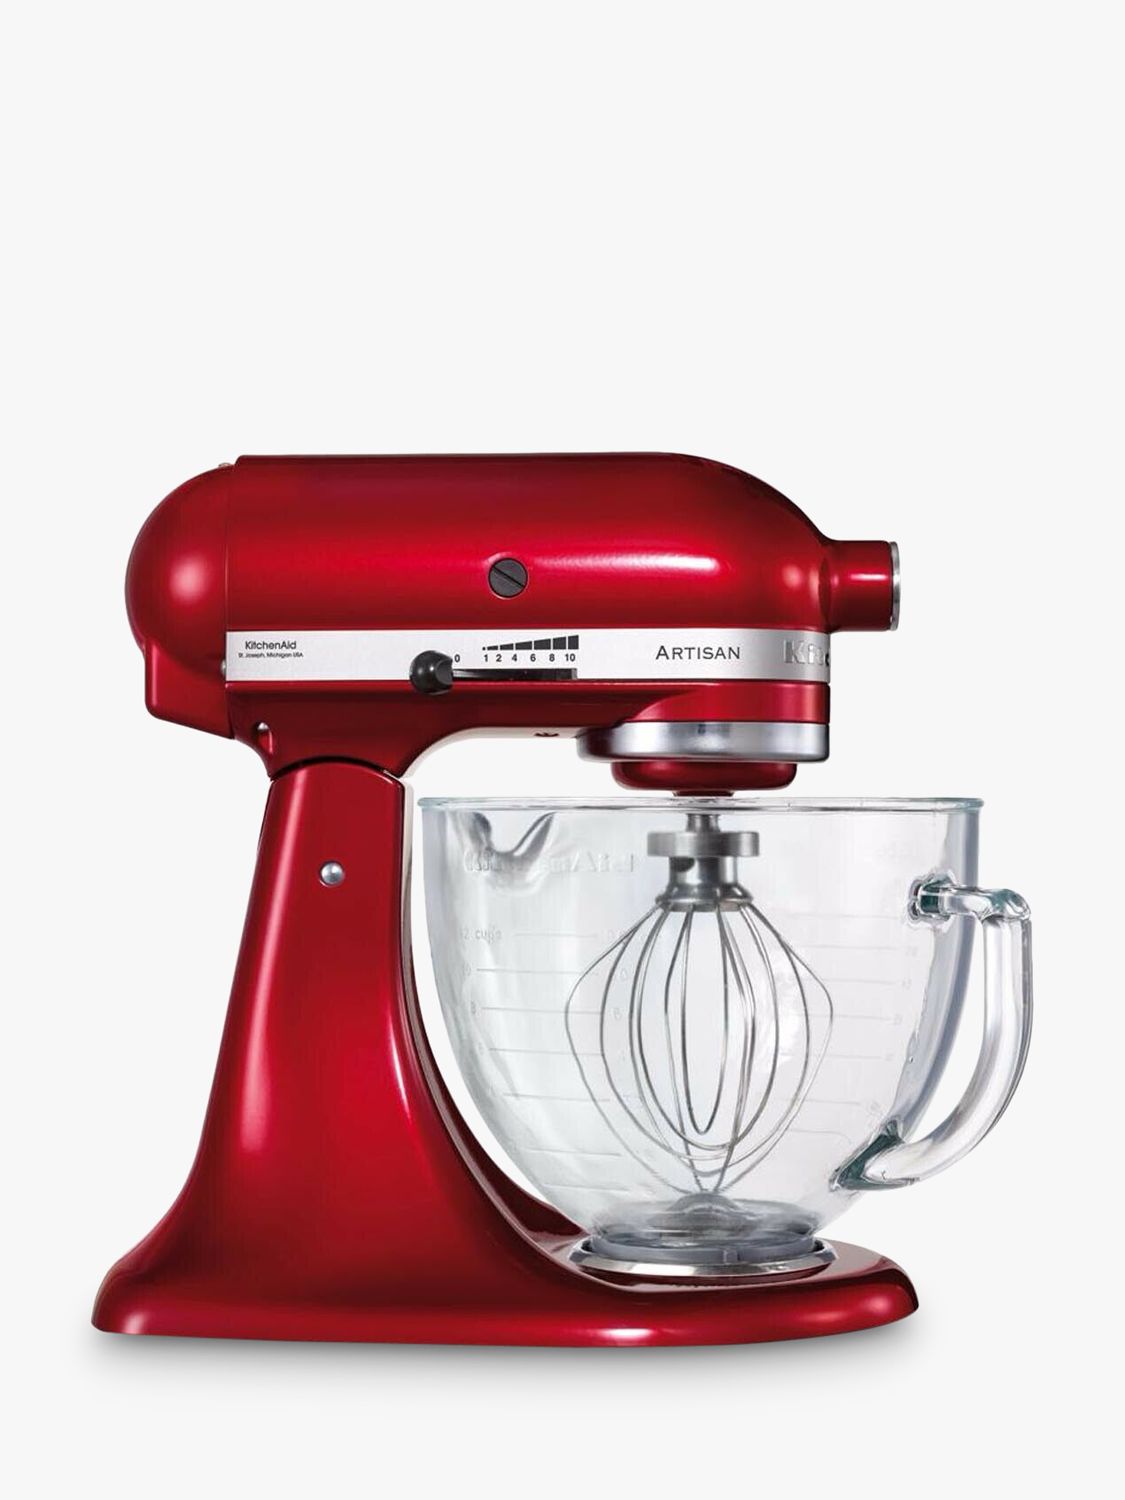 Buy KitchenAid Artisan 4.8L Stand Mixer, Candy Apple Red Online at johnlewis.com